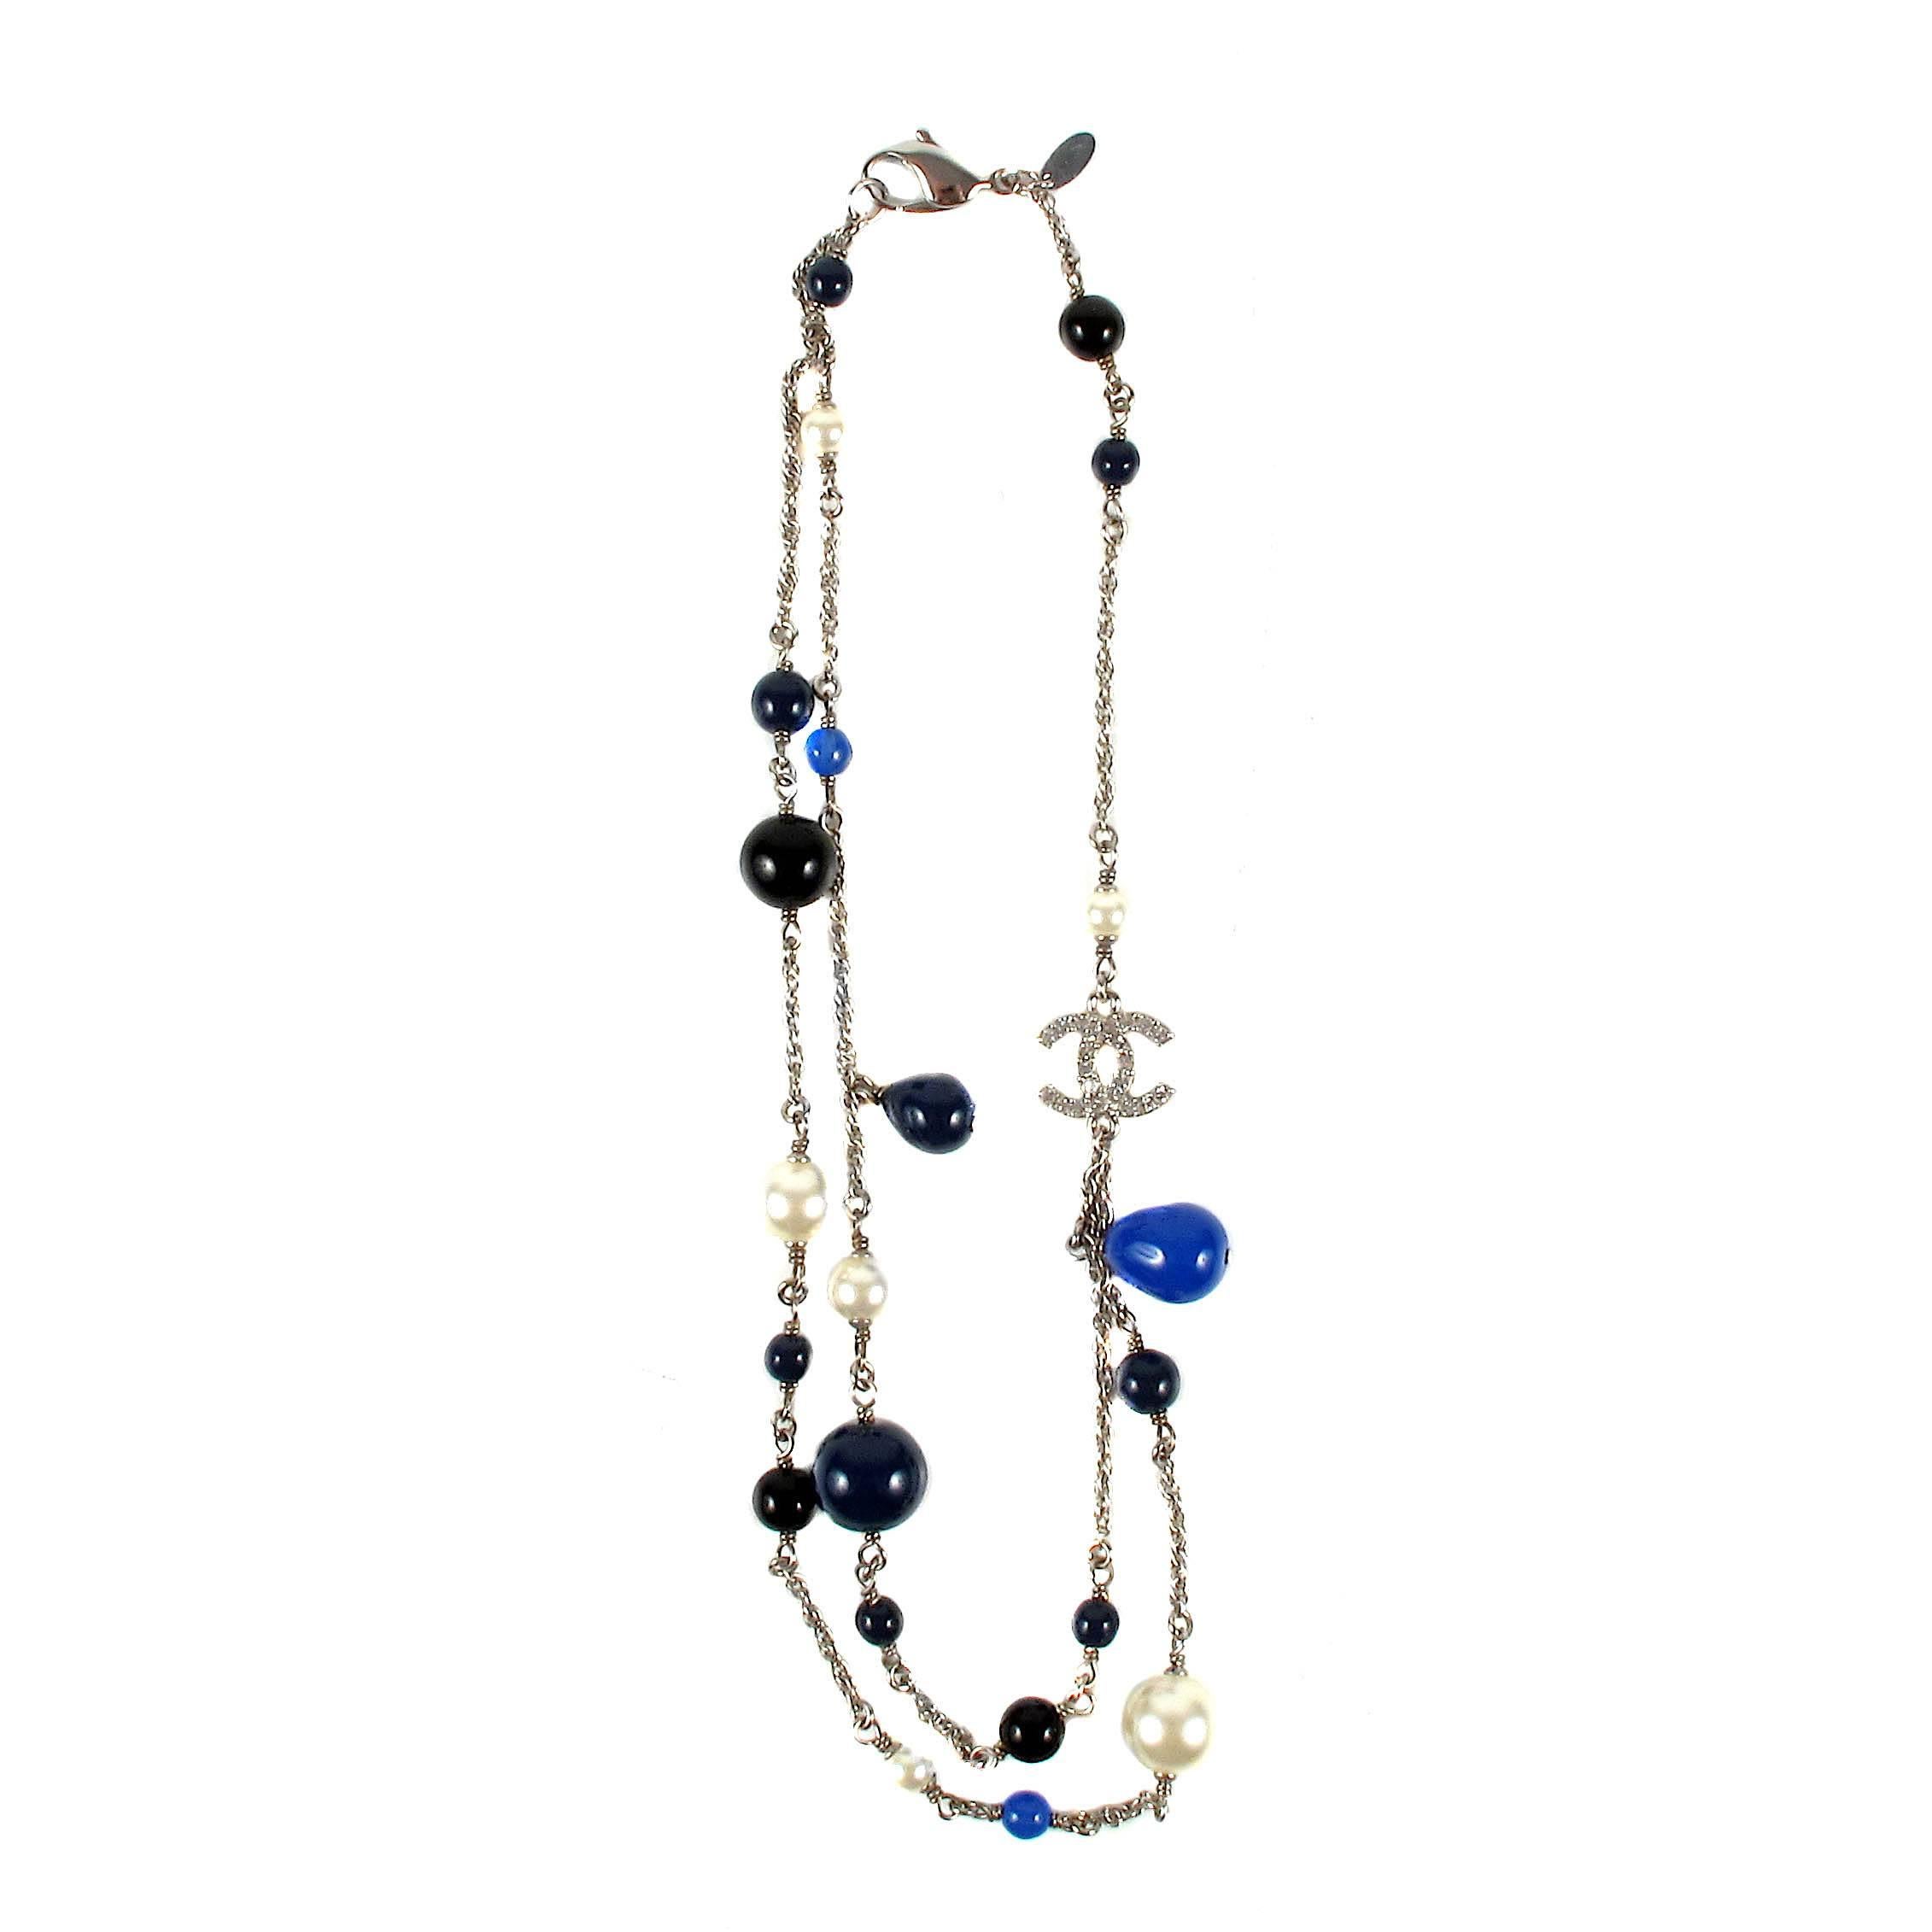 Chanel - Pearl Crystal Necklace

Color: Blue / Black / Silver

Material: Metal / Pearl Beads / Crystal

------------------------------------------------------------

Details:

- silver tone hardware

- CC crystal rhinestone logo